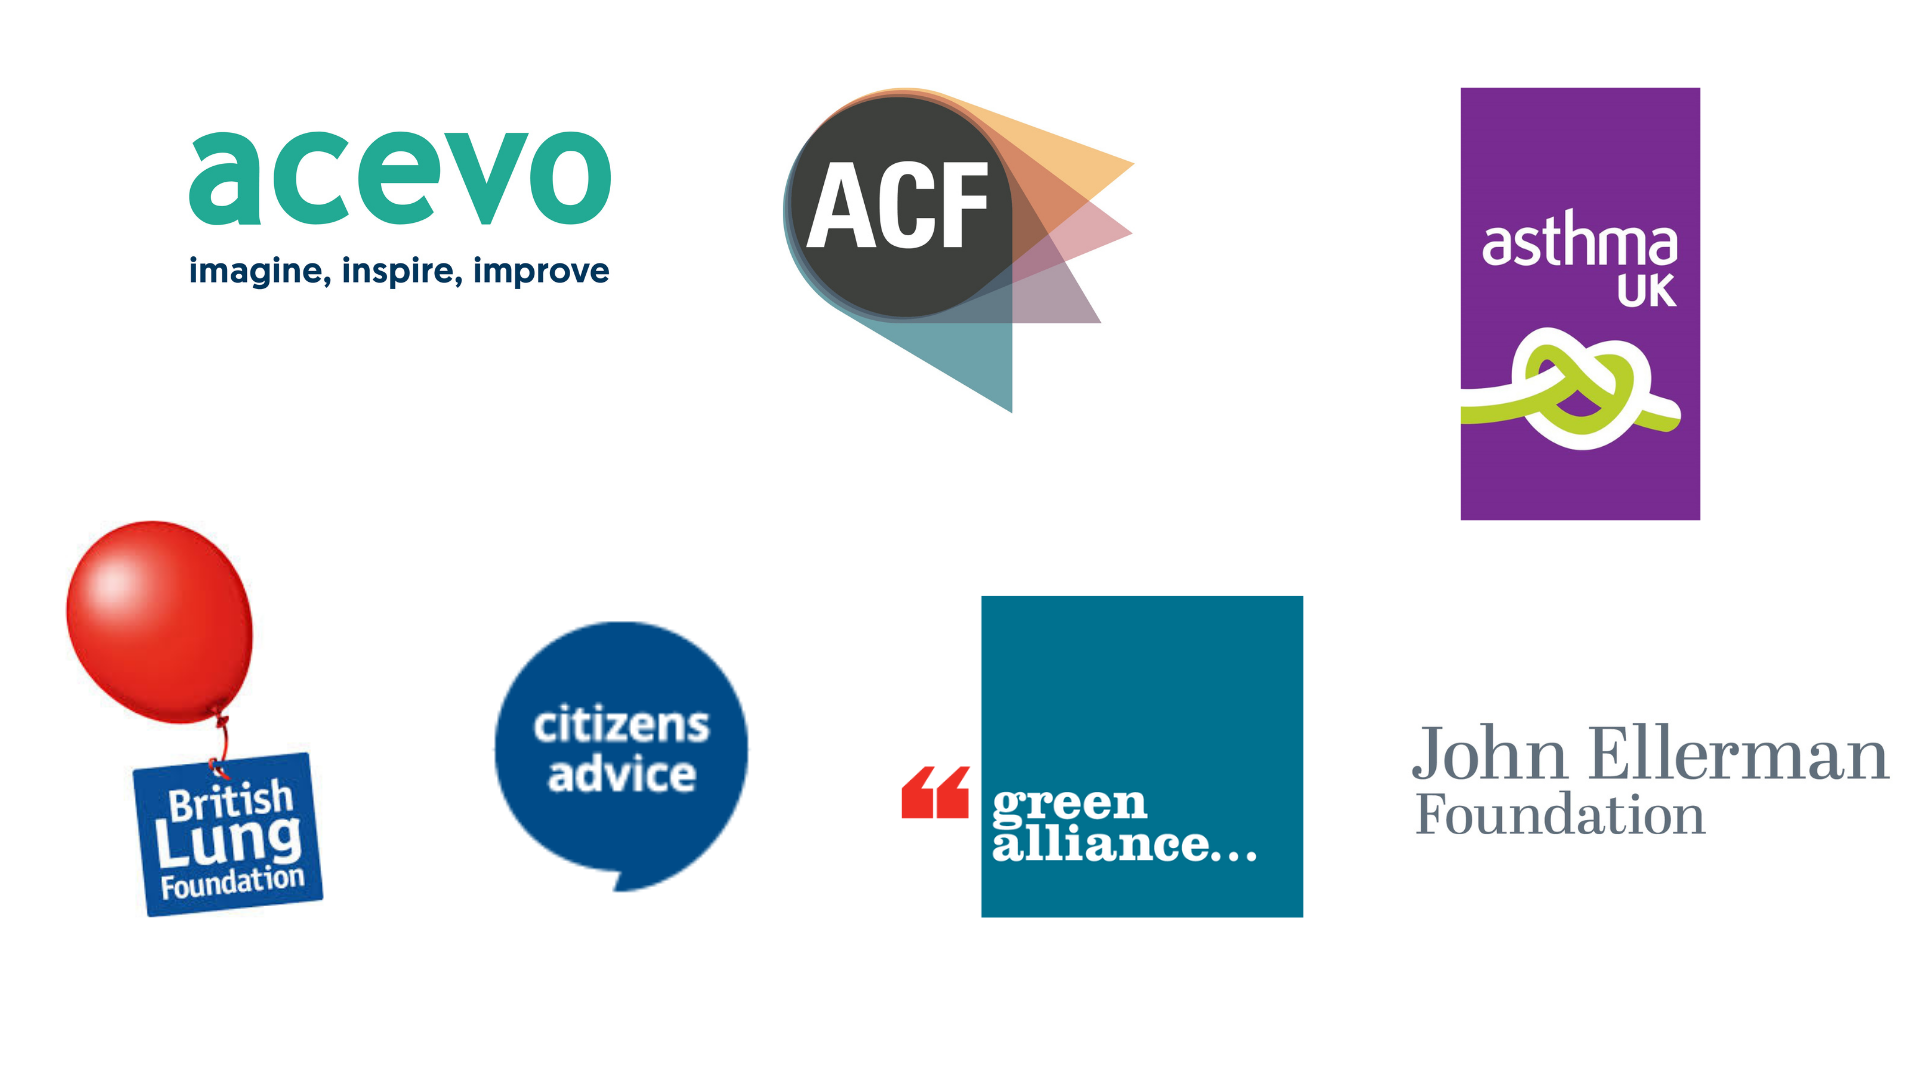 Image shows the logos of ACEVO, ACF, Asthma UK, British Lung Foundation, Citizens Advice, Green Alliance and the John Ellerman Foundation